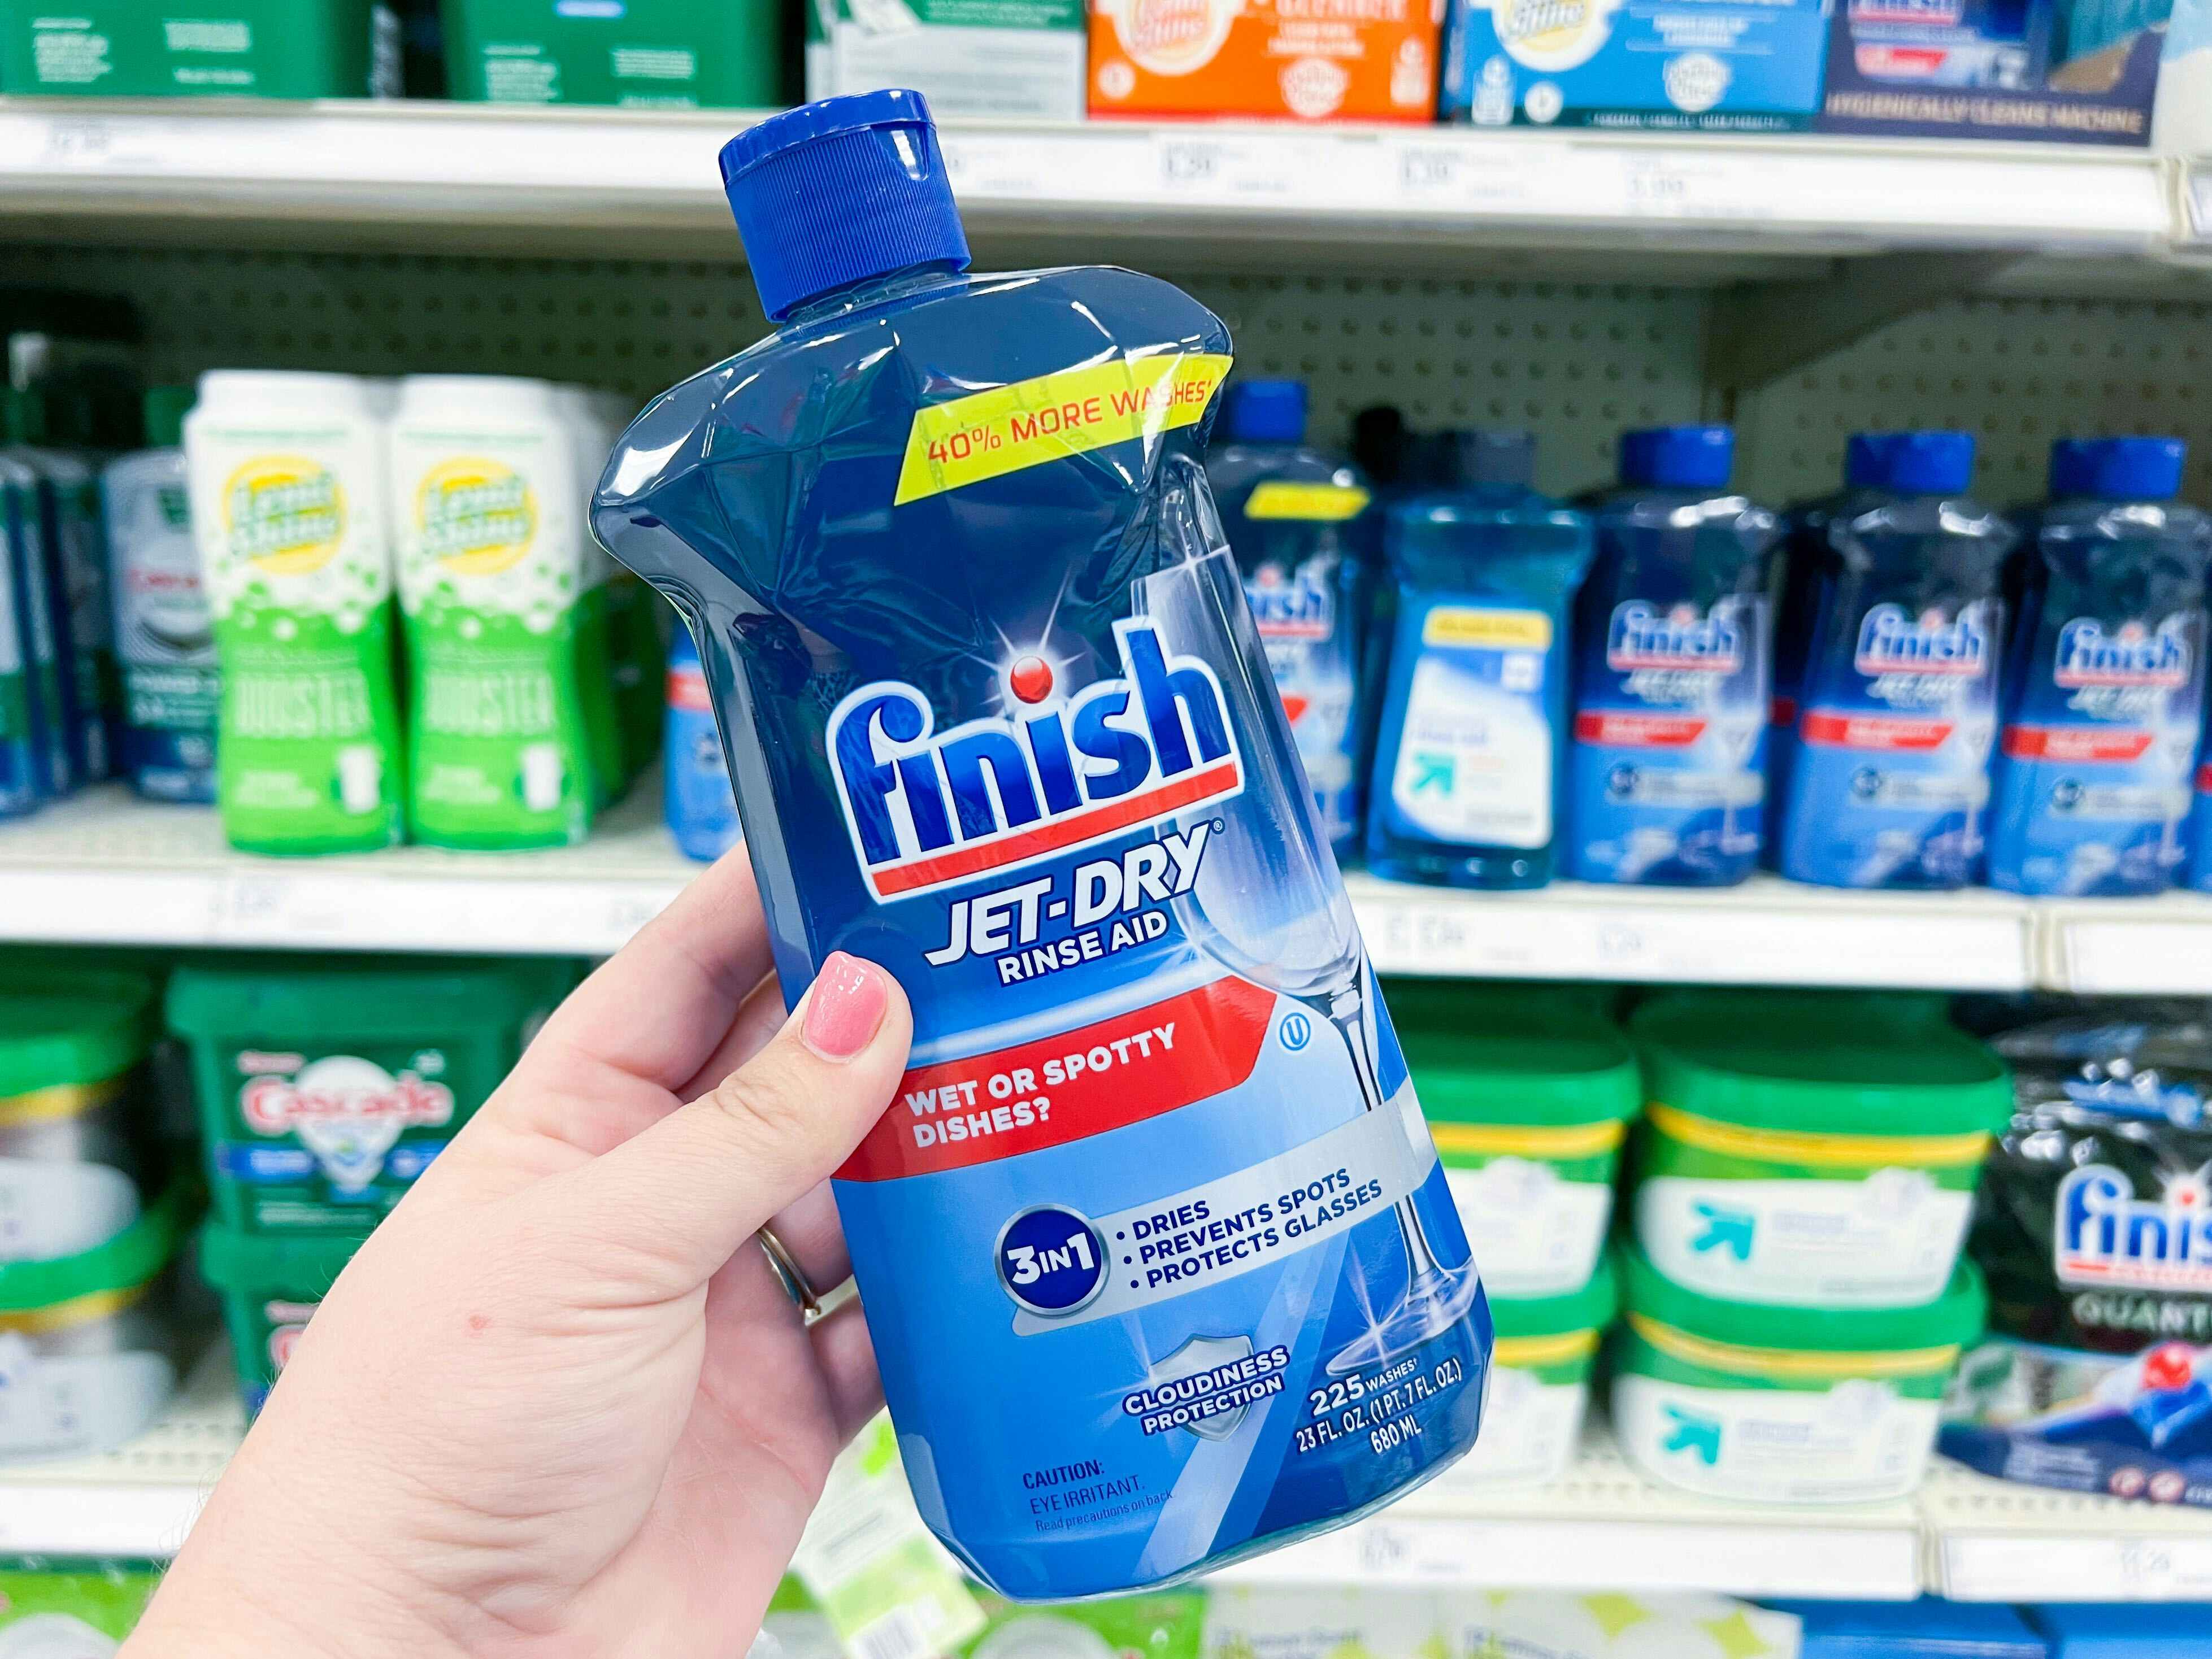 Finish Jet-Dry Dishwasher Rinse Aid, as Low as $1.92 on Amazon